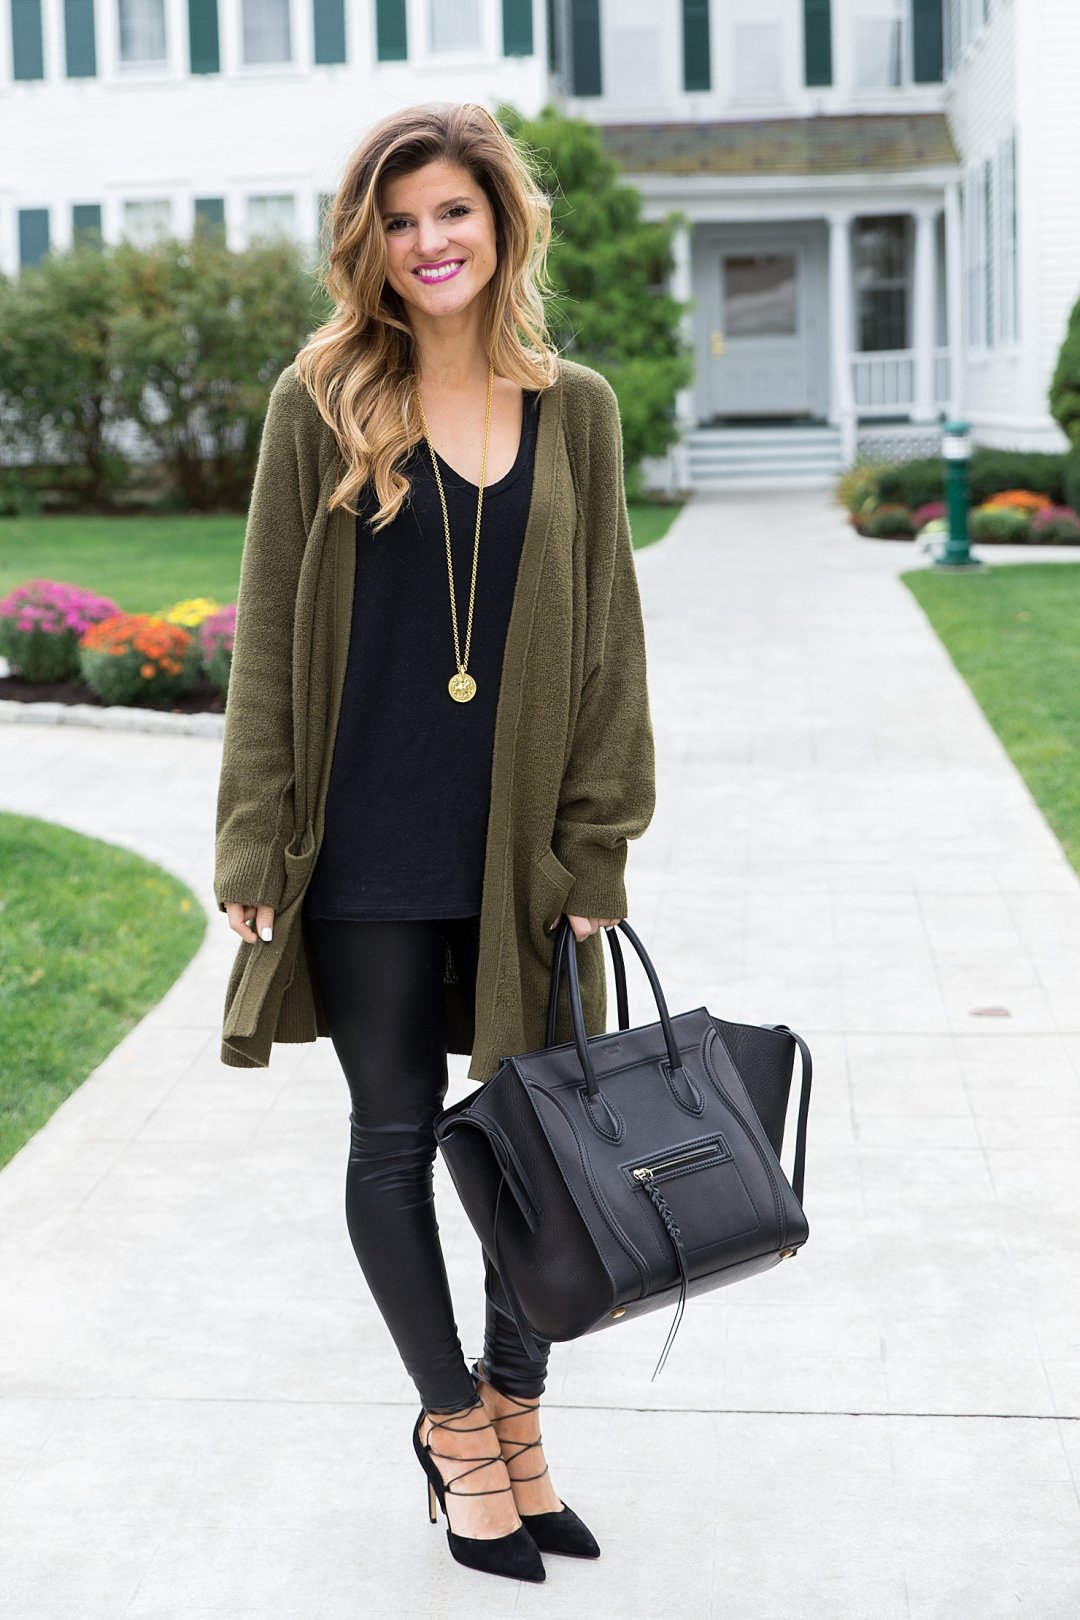 The Best Ways to Wear Leggings and Uggs This Winter  Uggs outfit, Black  leggings outfit winter, Leggings outfit winter